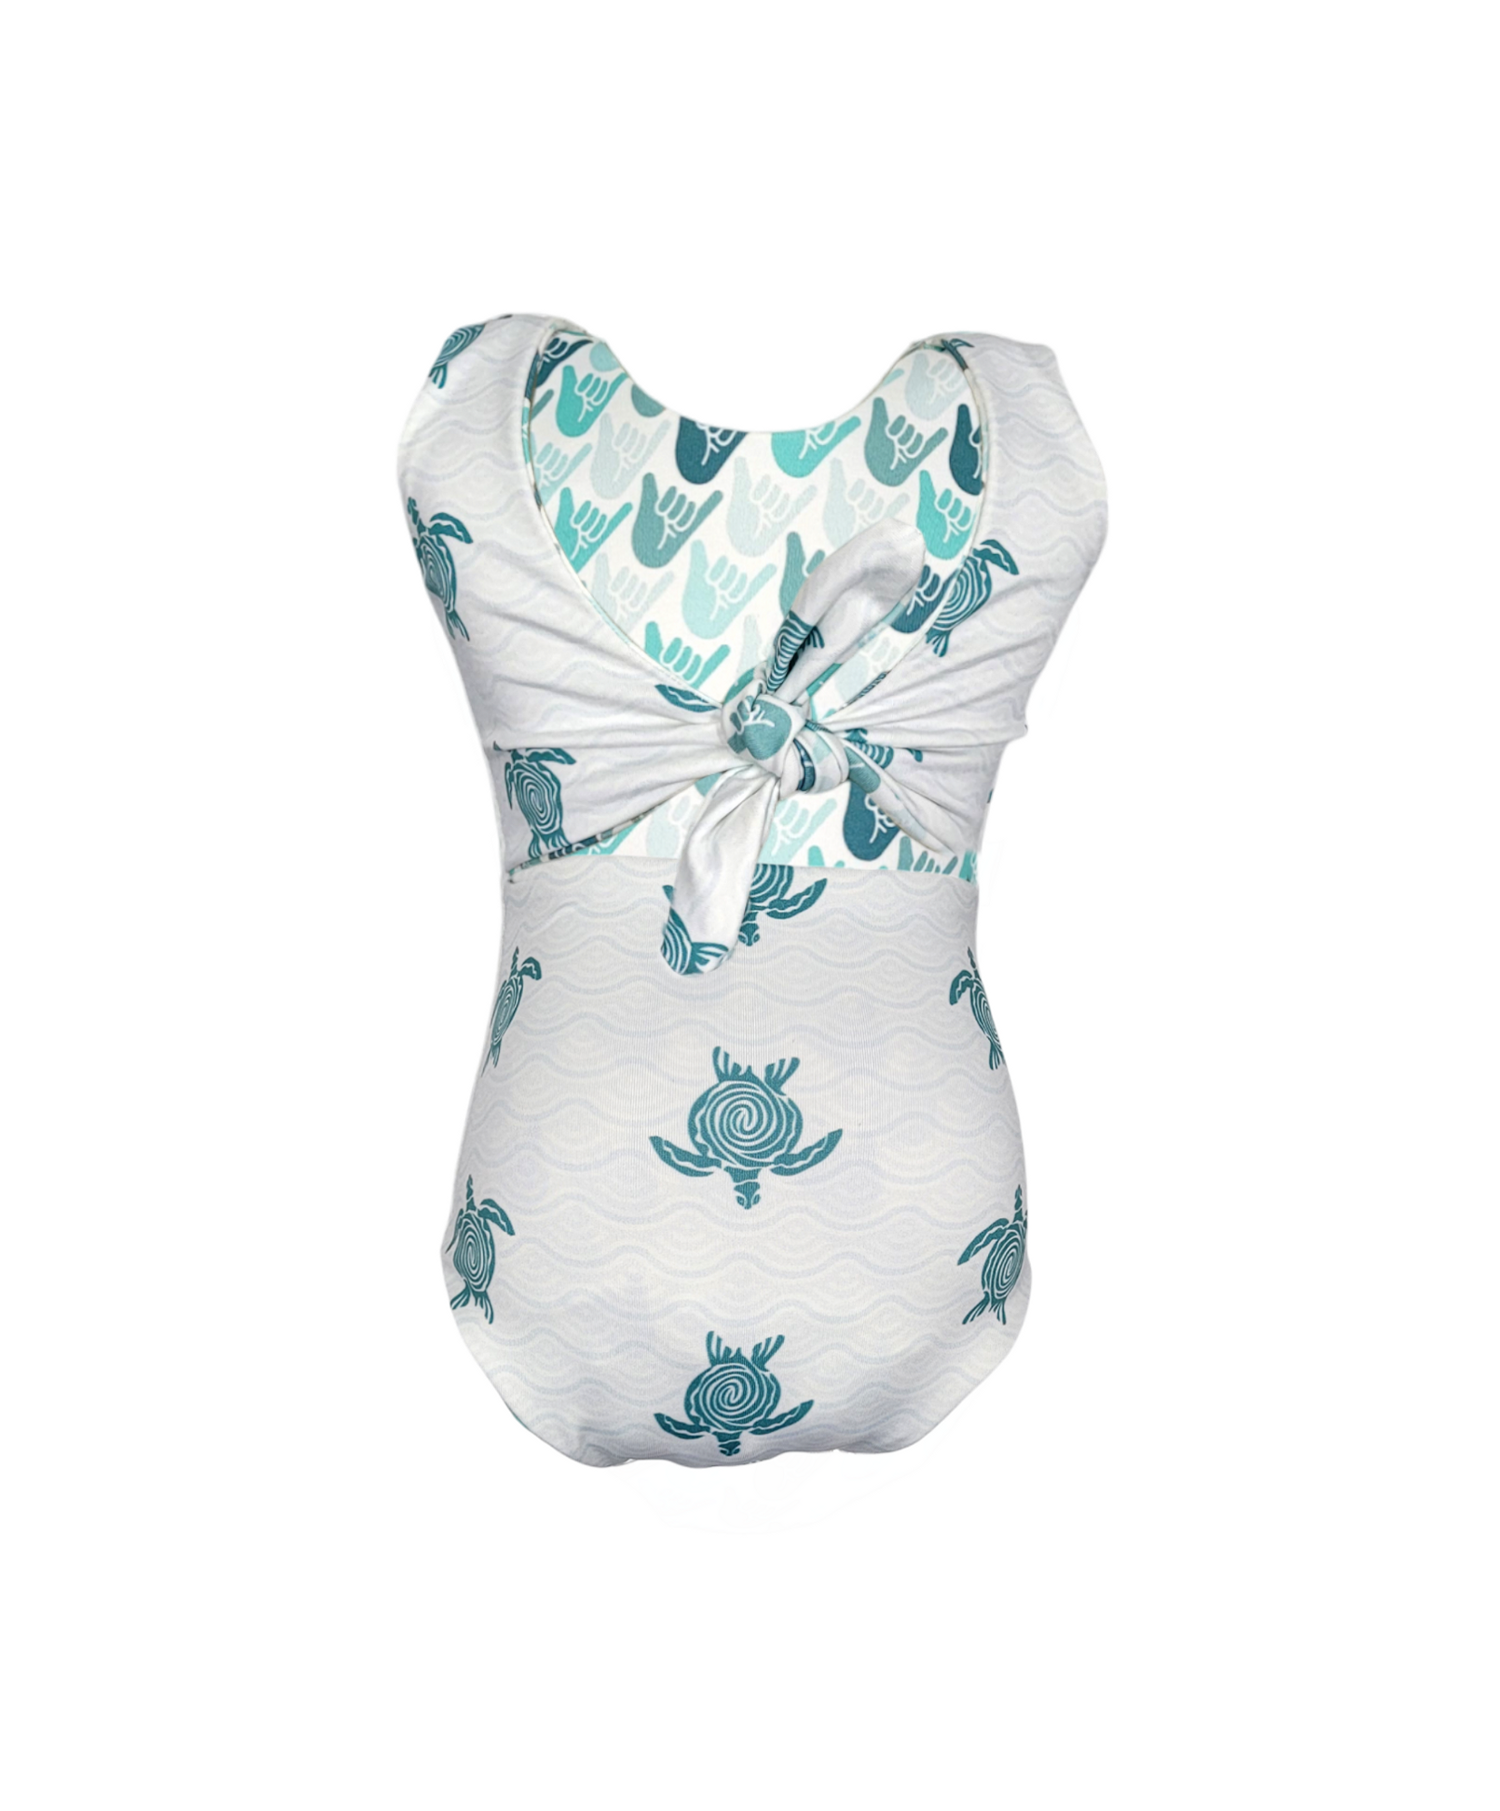 Girls reversible swimsuit. White with teal turtles. 